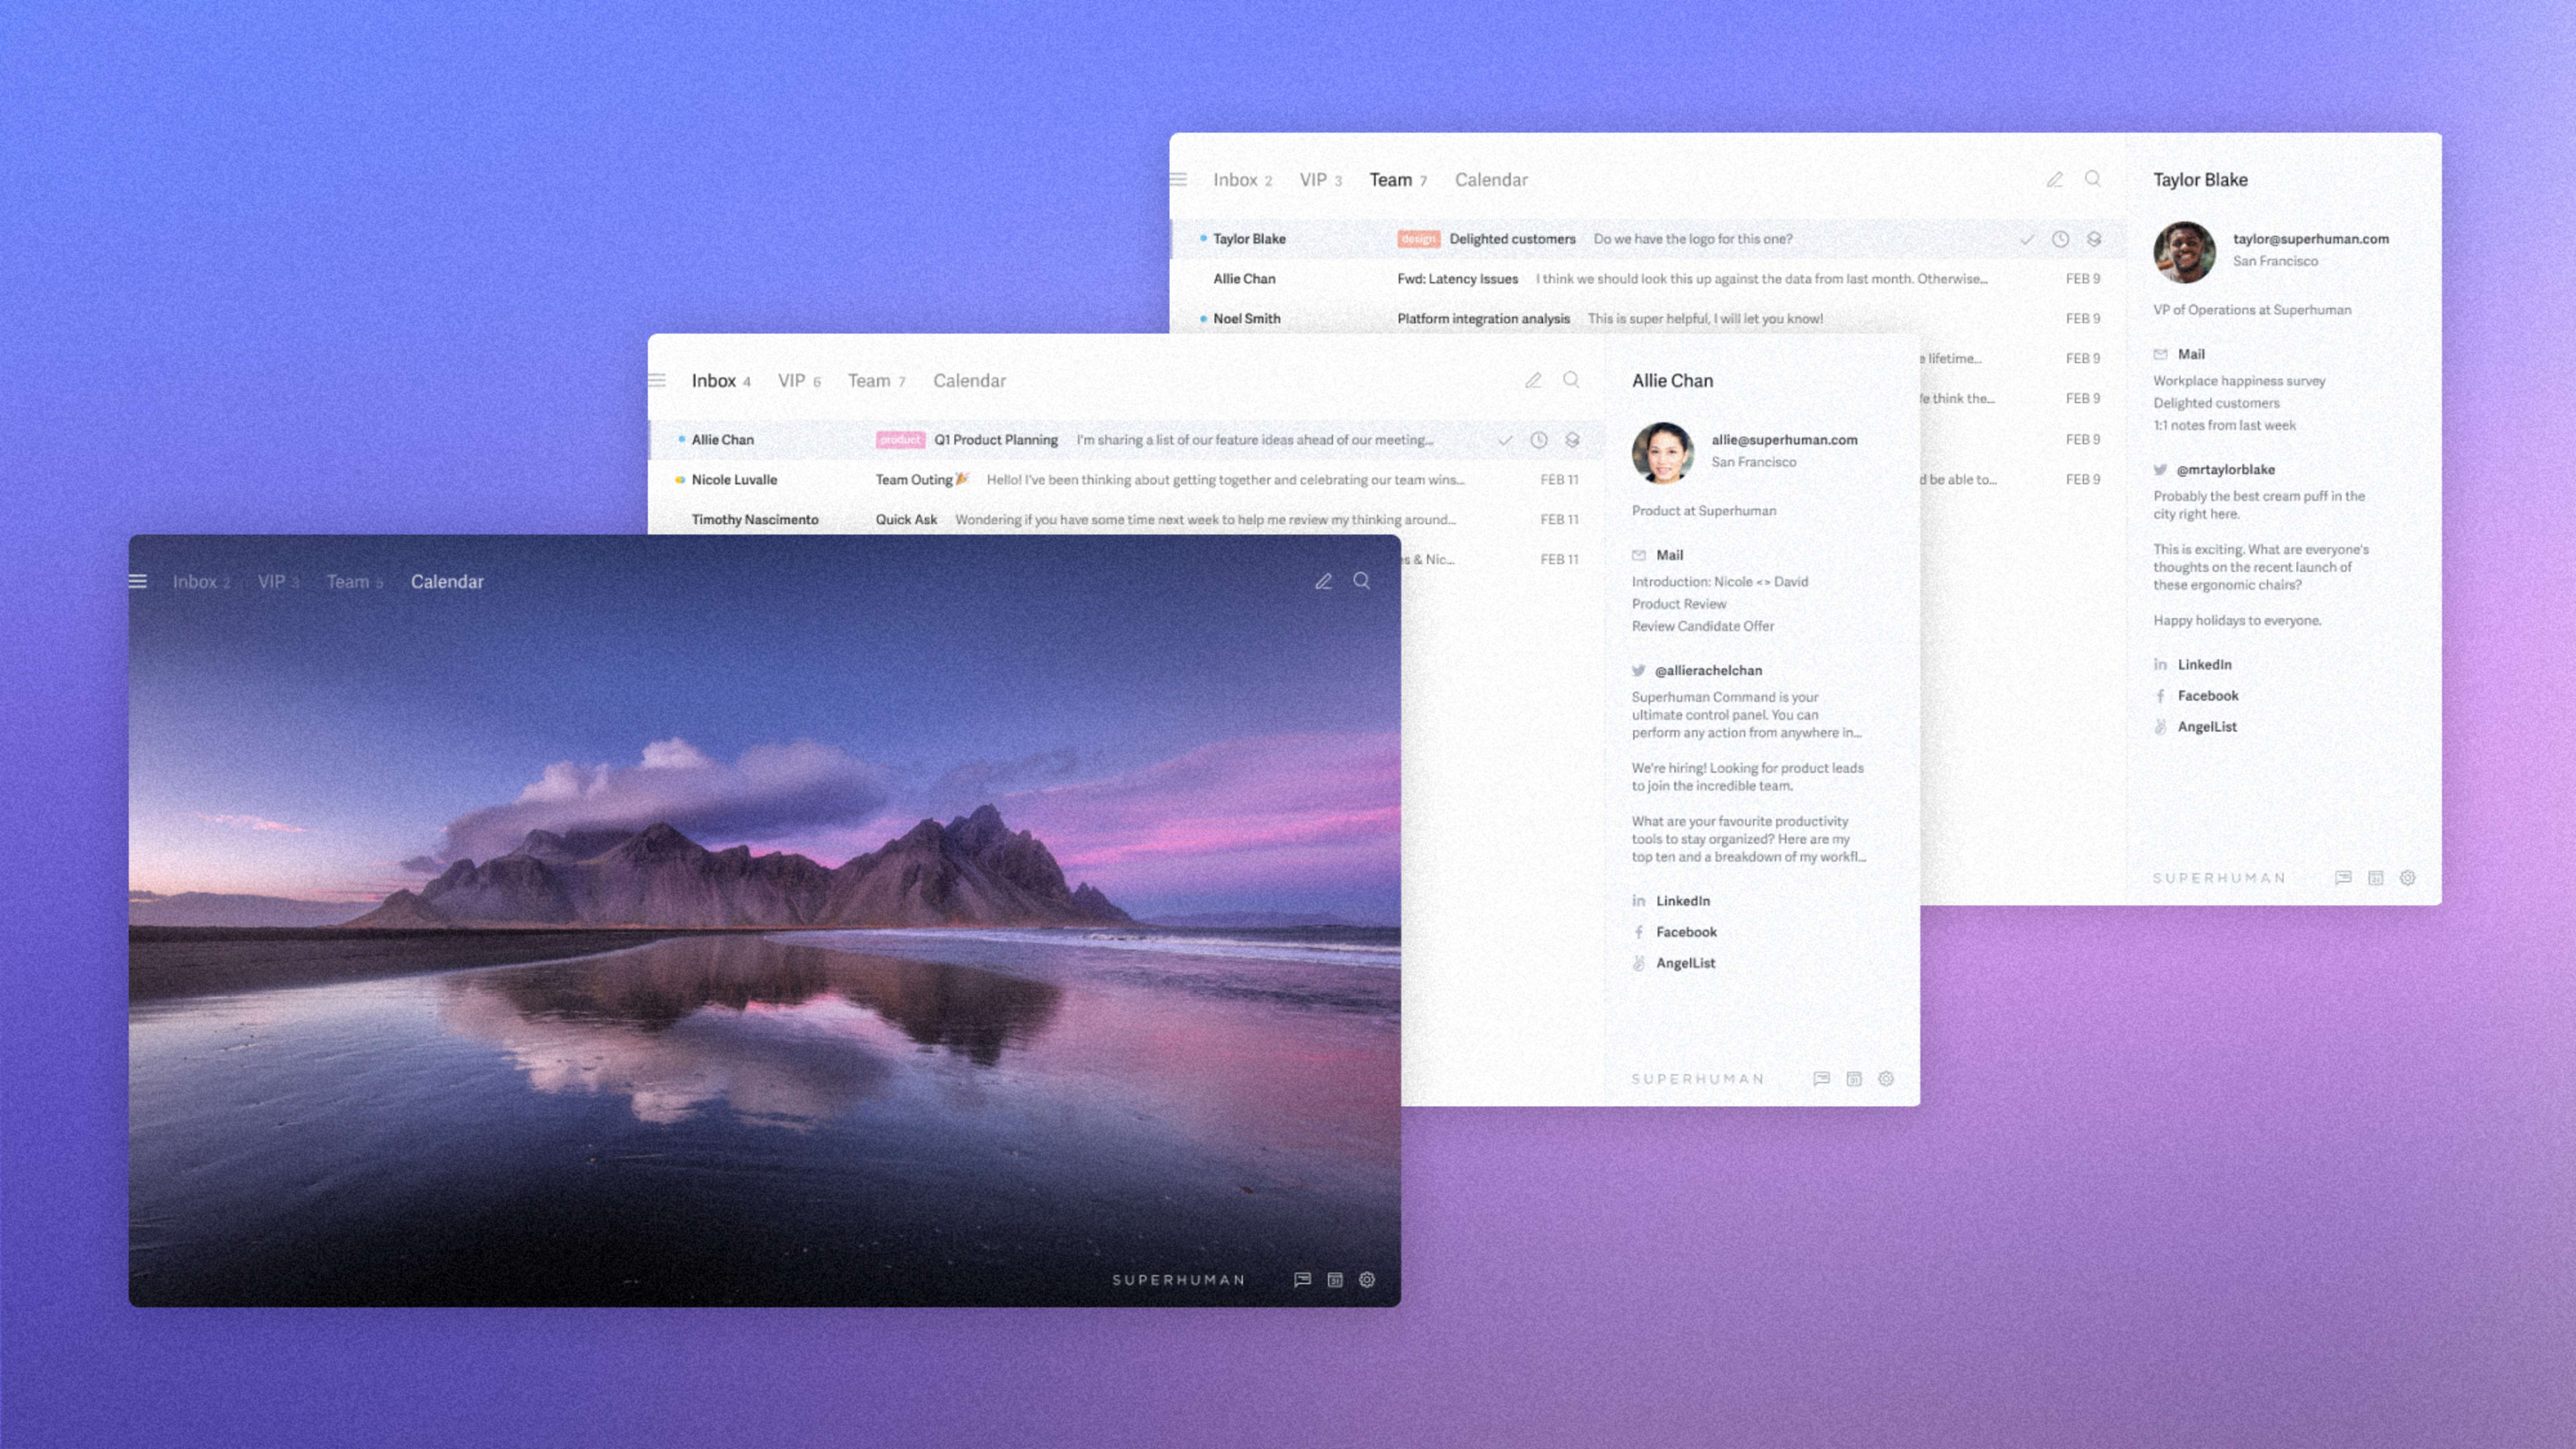 Superhuman is pivoting its email app to teams